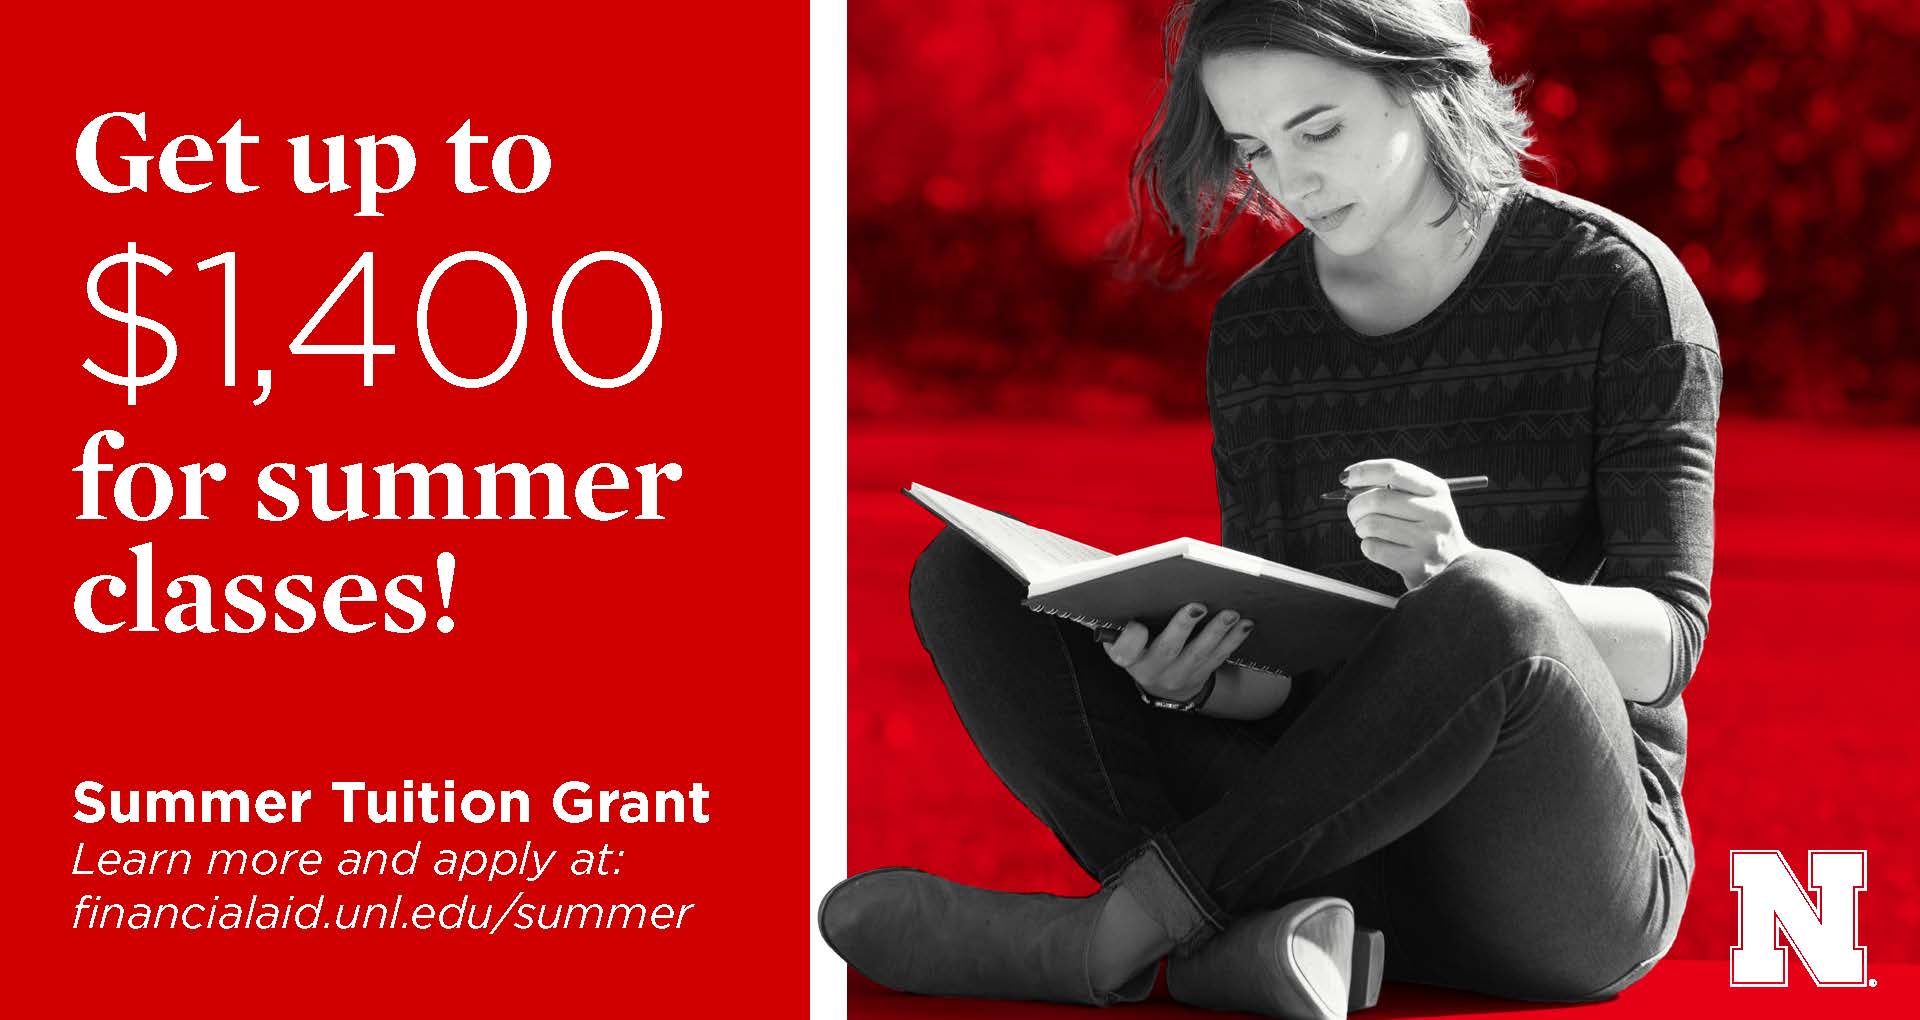 Get up to $1,400 for summer classes!